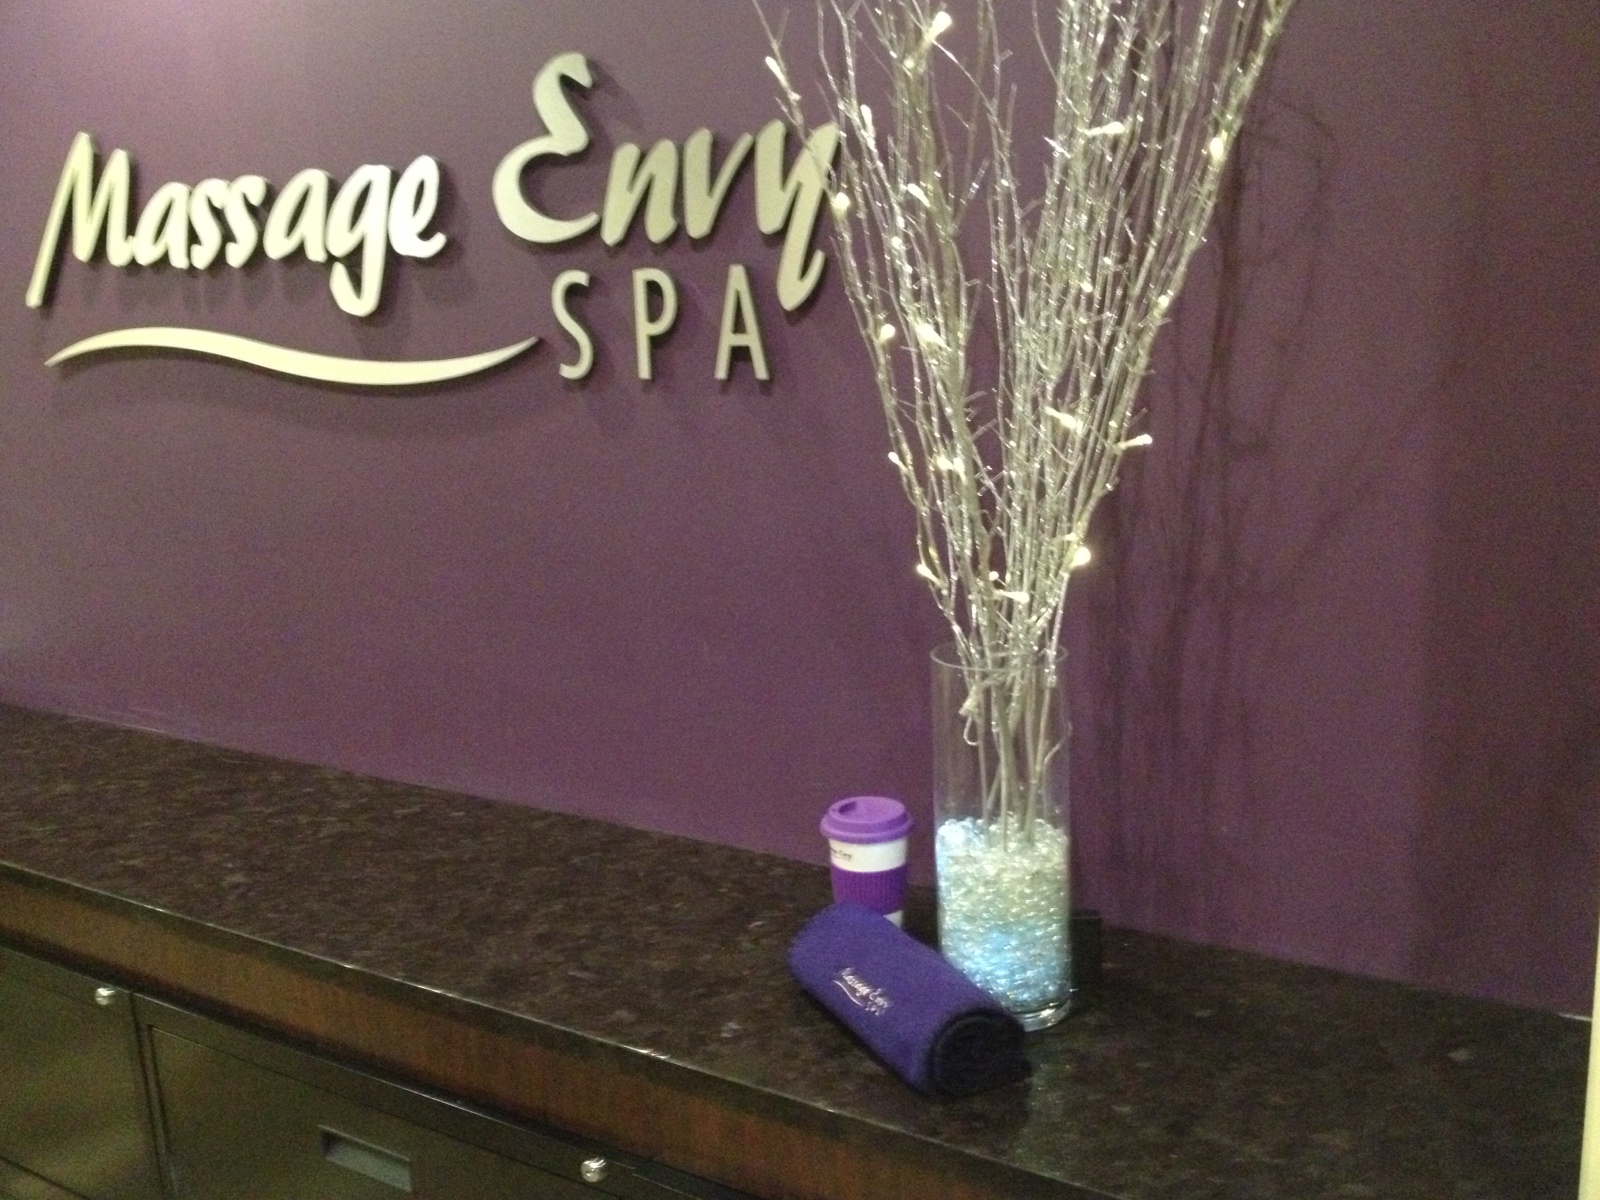 There S A Fresh New Face In Town Massage Envy Spa Opens Its Doors New Clinic Located In